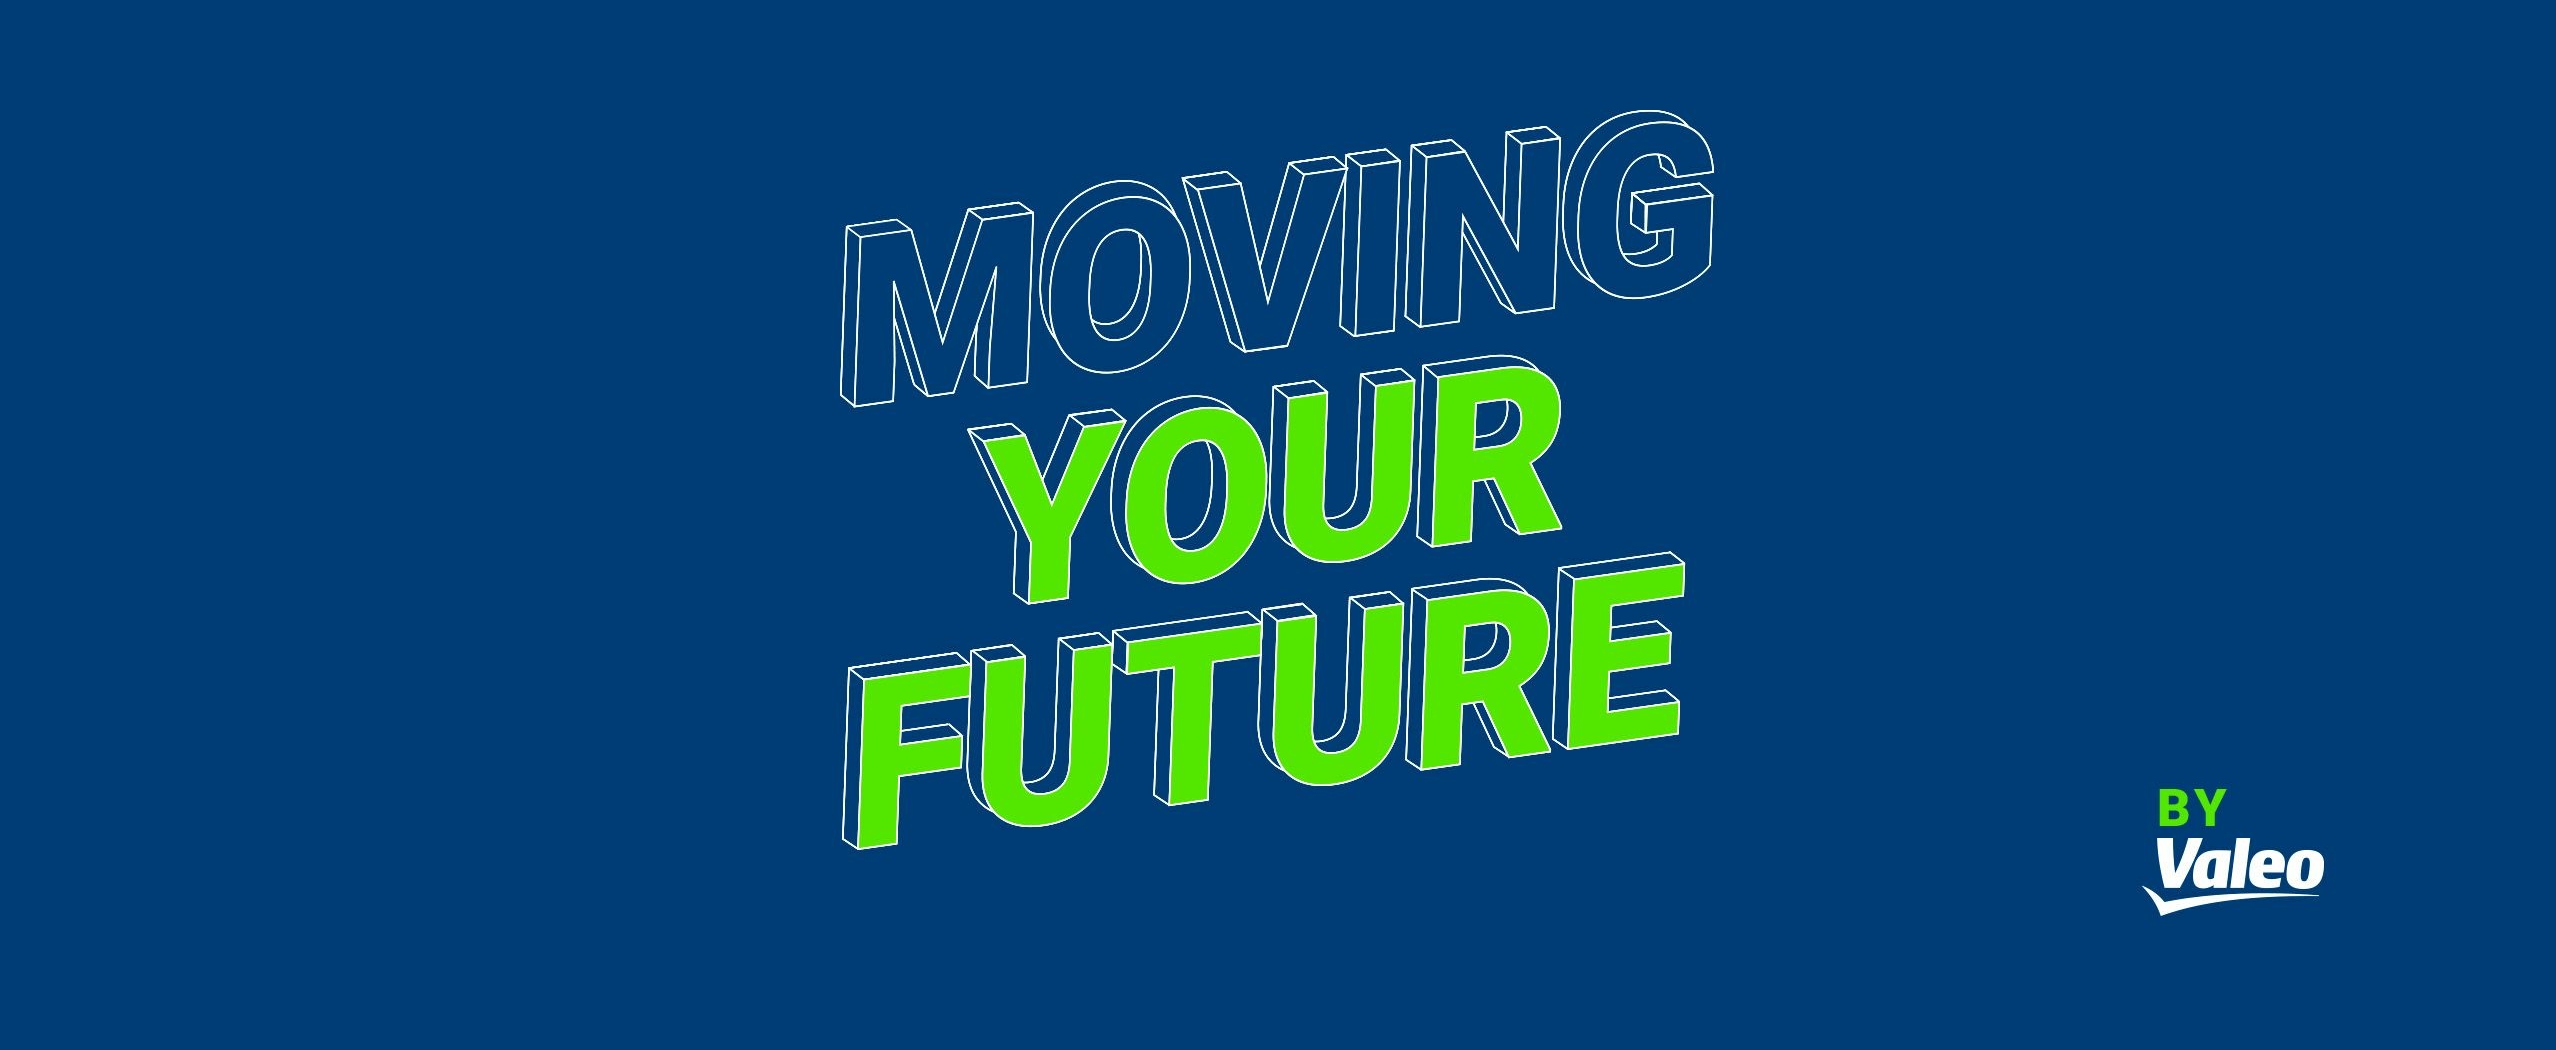 Moving your future by Valeo